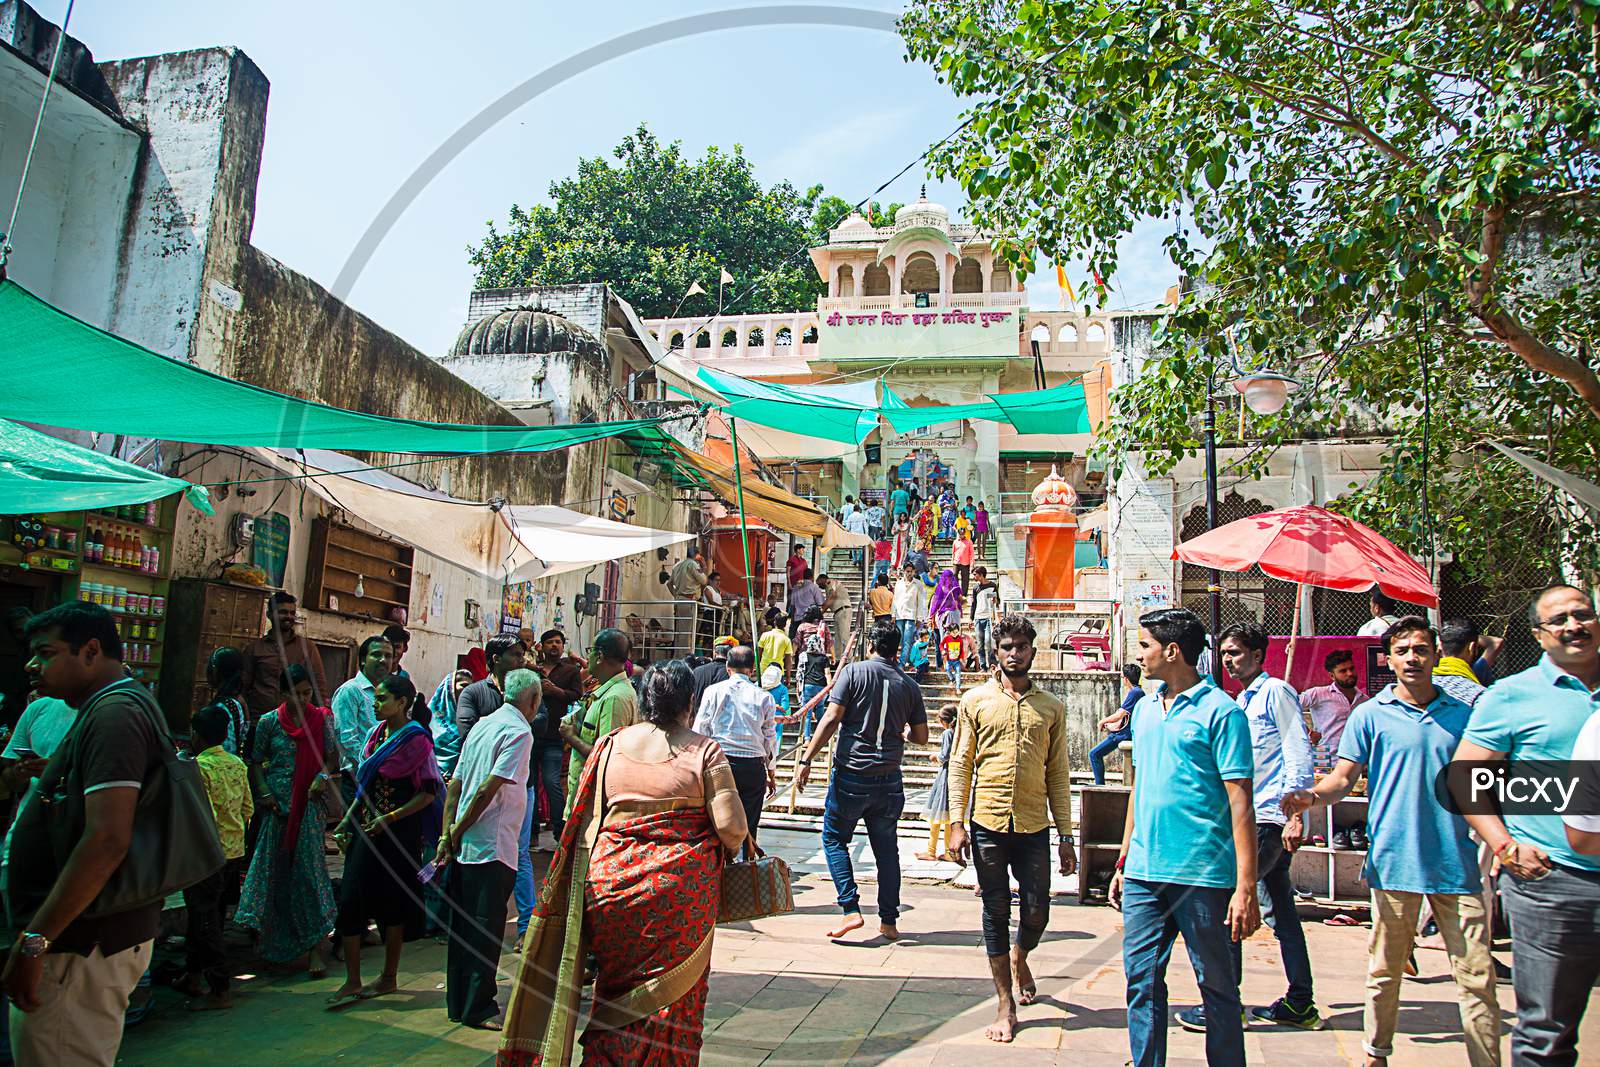 Pushkar, Rajasthan, India - November 14, 2019: Street View With Of Jagatpita Brahma Mandir Is A Hindu Temple Situated At Pushkar In The Indian State Of Rajasthan, Crowd Walking All Round The Temple.